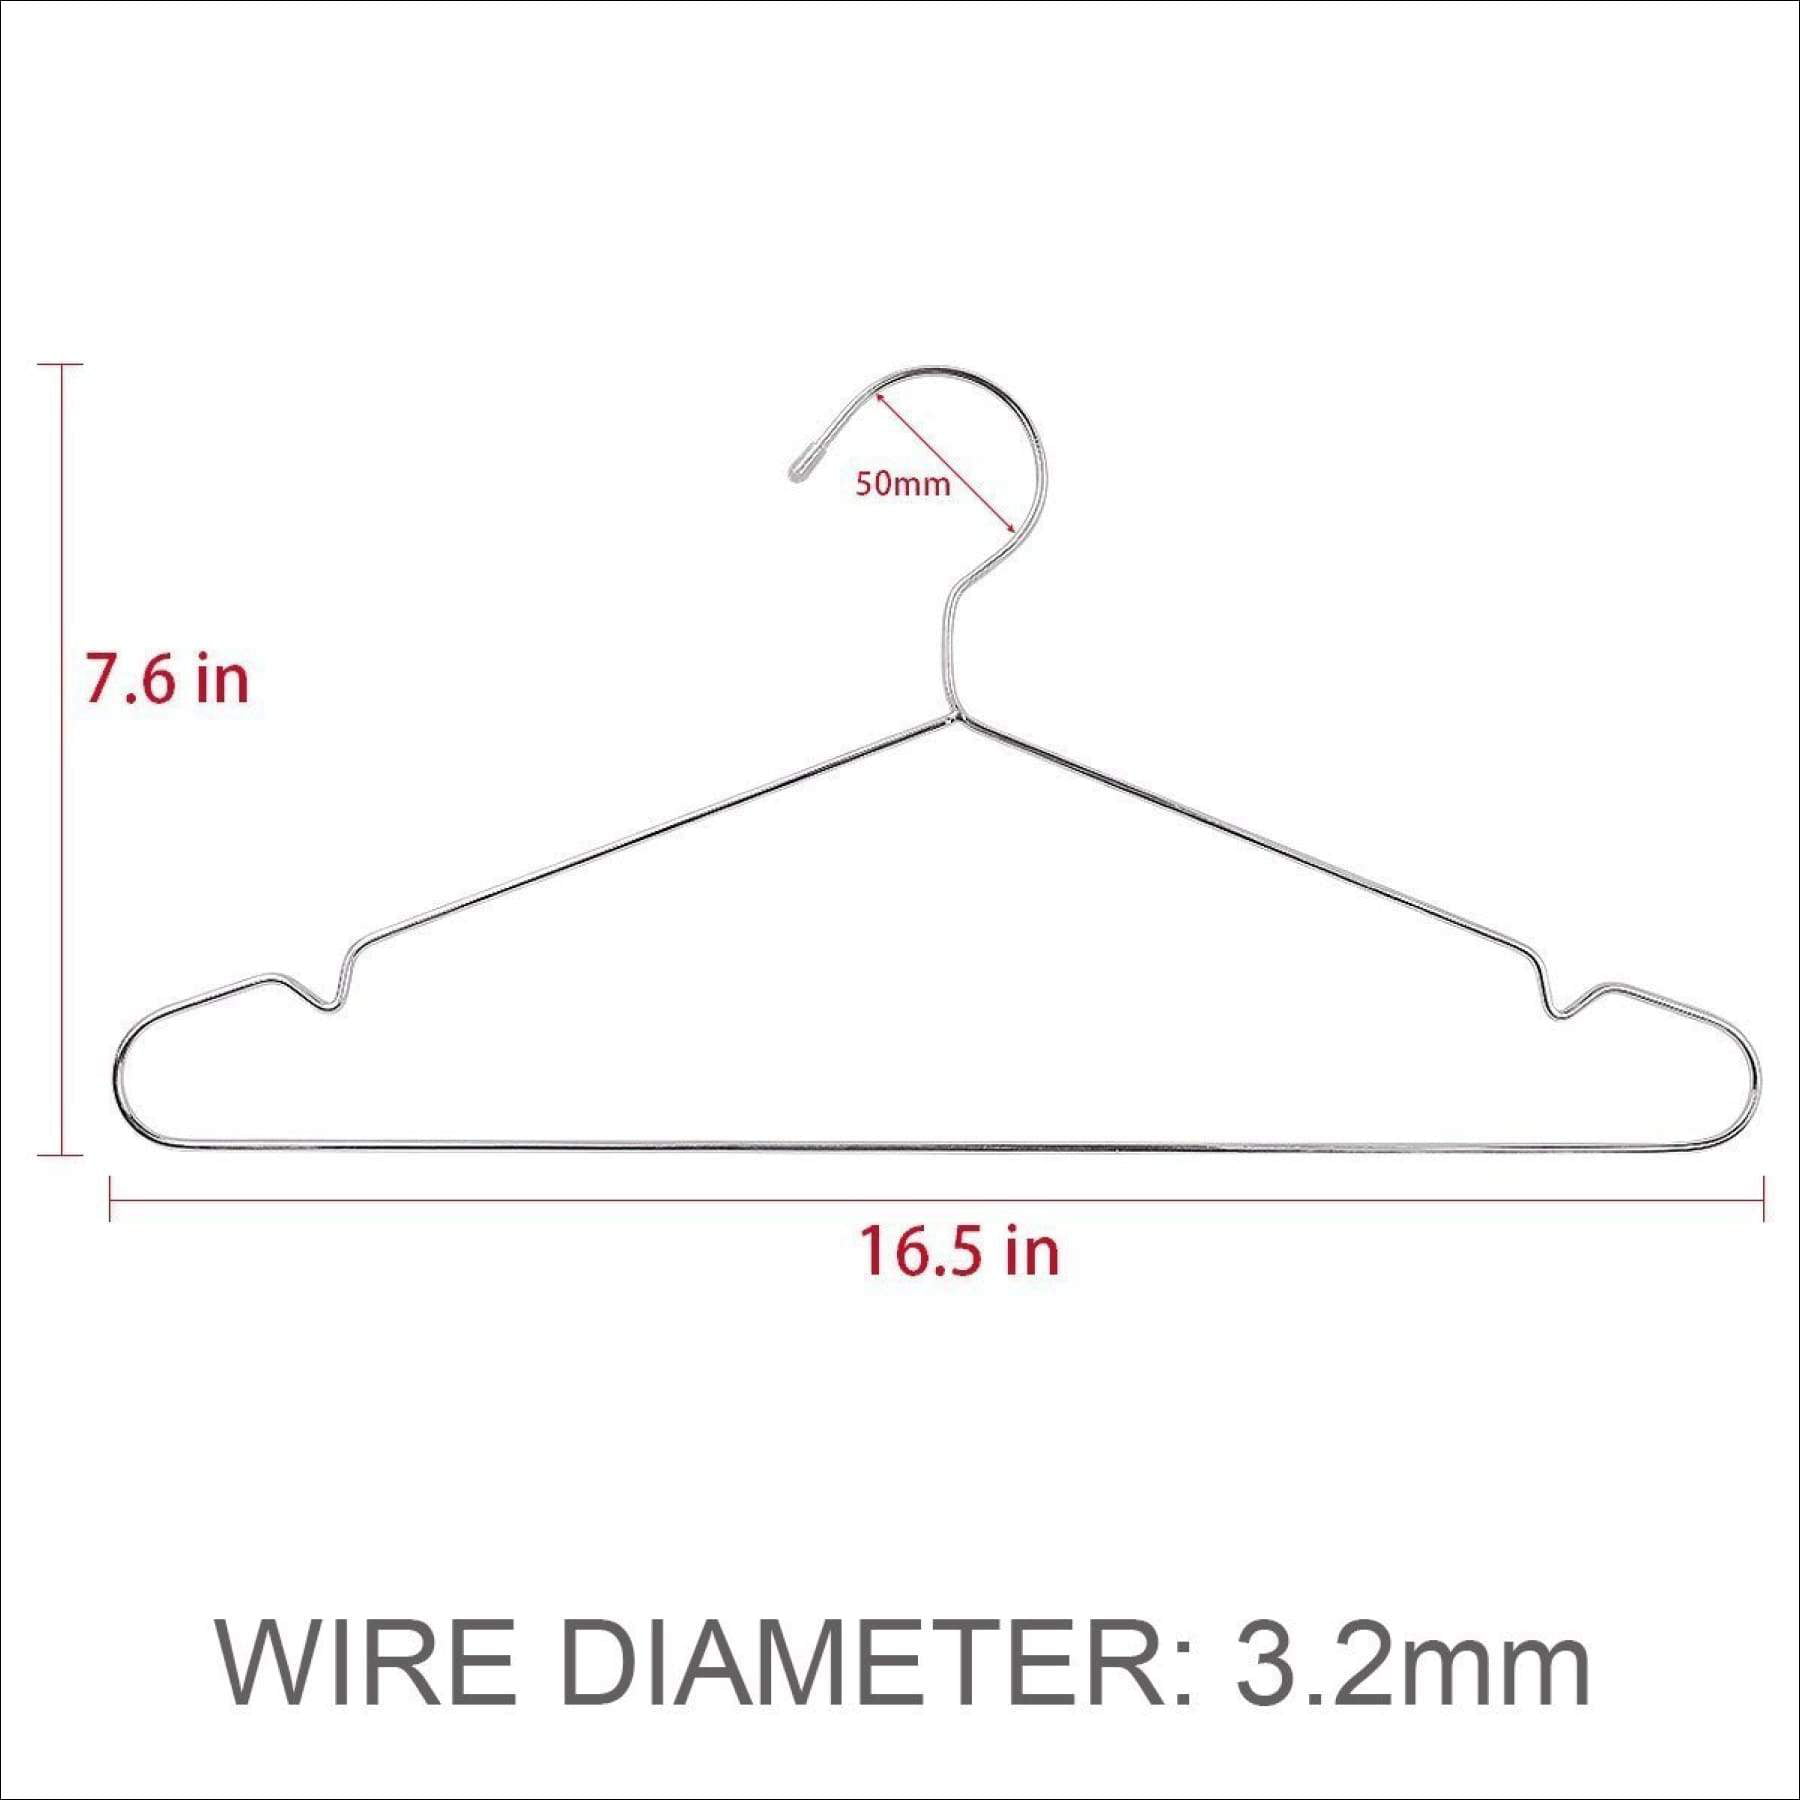 Coat Hangers 40 Pack Clothes Hangers, Seropy Metal Hangers Heavy Duty Wire  Hangers with Non Slip Notch, Ultra Thin Stainless Steel Hangers Space